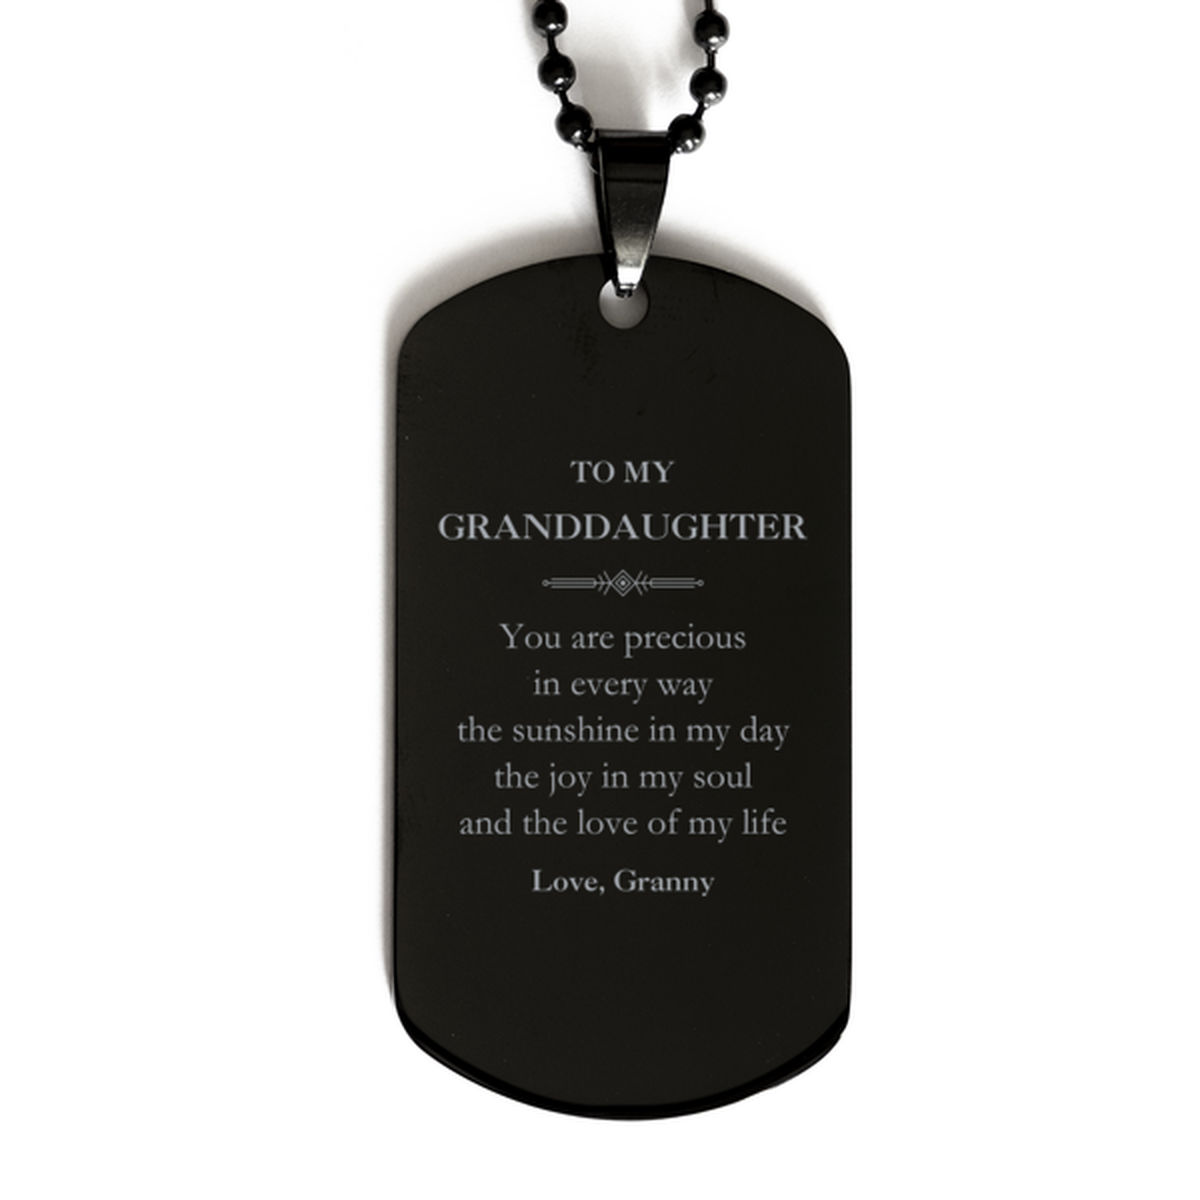 Graduation Gifts for Granddaughter Black Dog Tag Present from Granny, Christmas Granddaughter Birthday Gifts Granddaughter You are precious in every way the sunshine in my day. Love, Granny